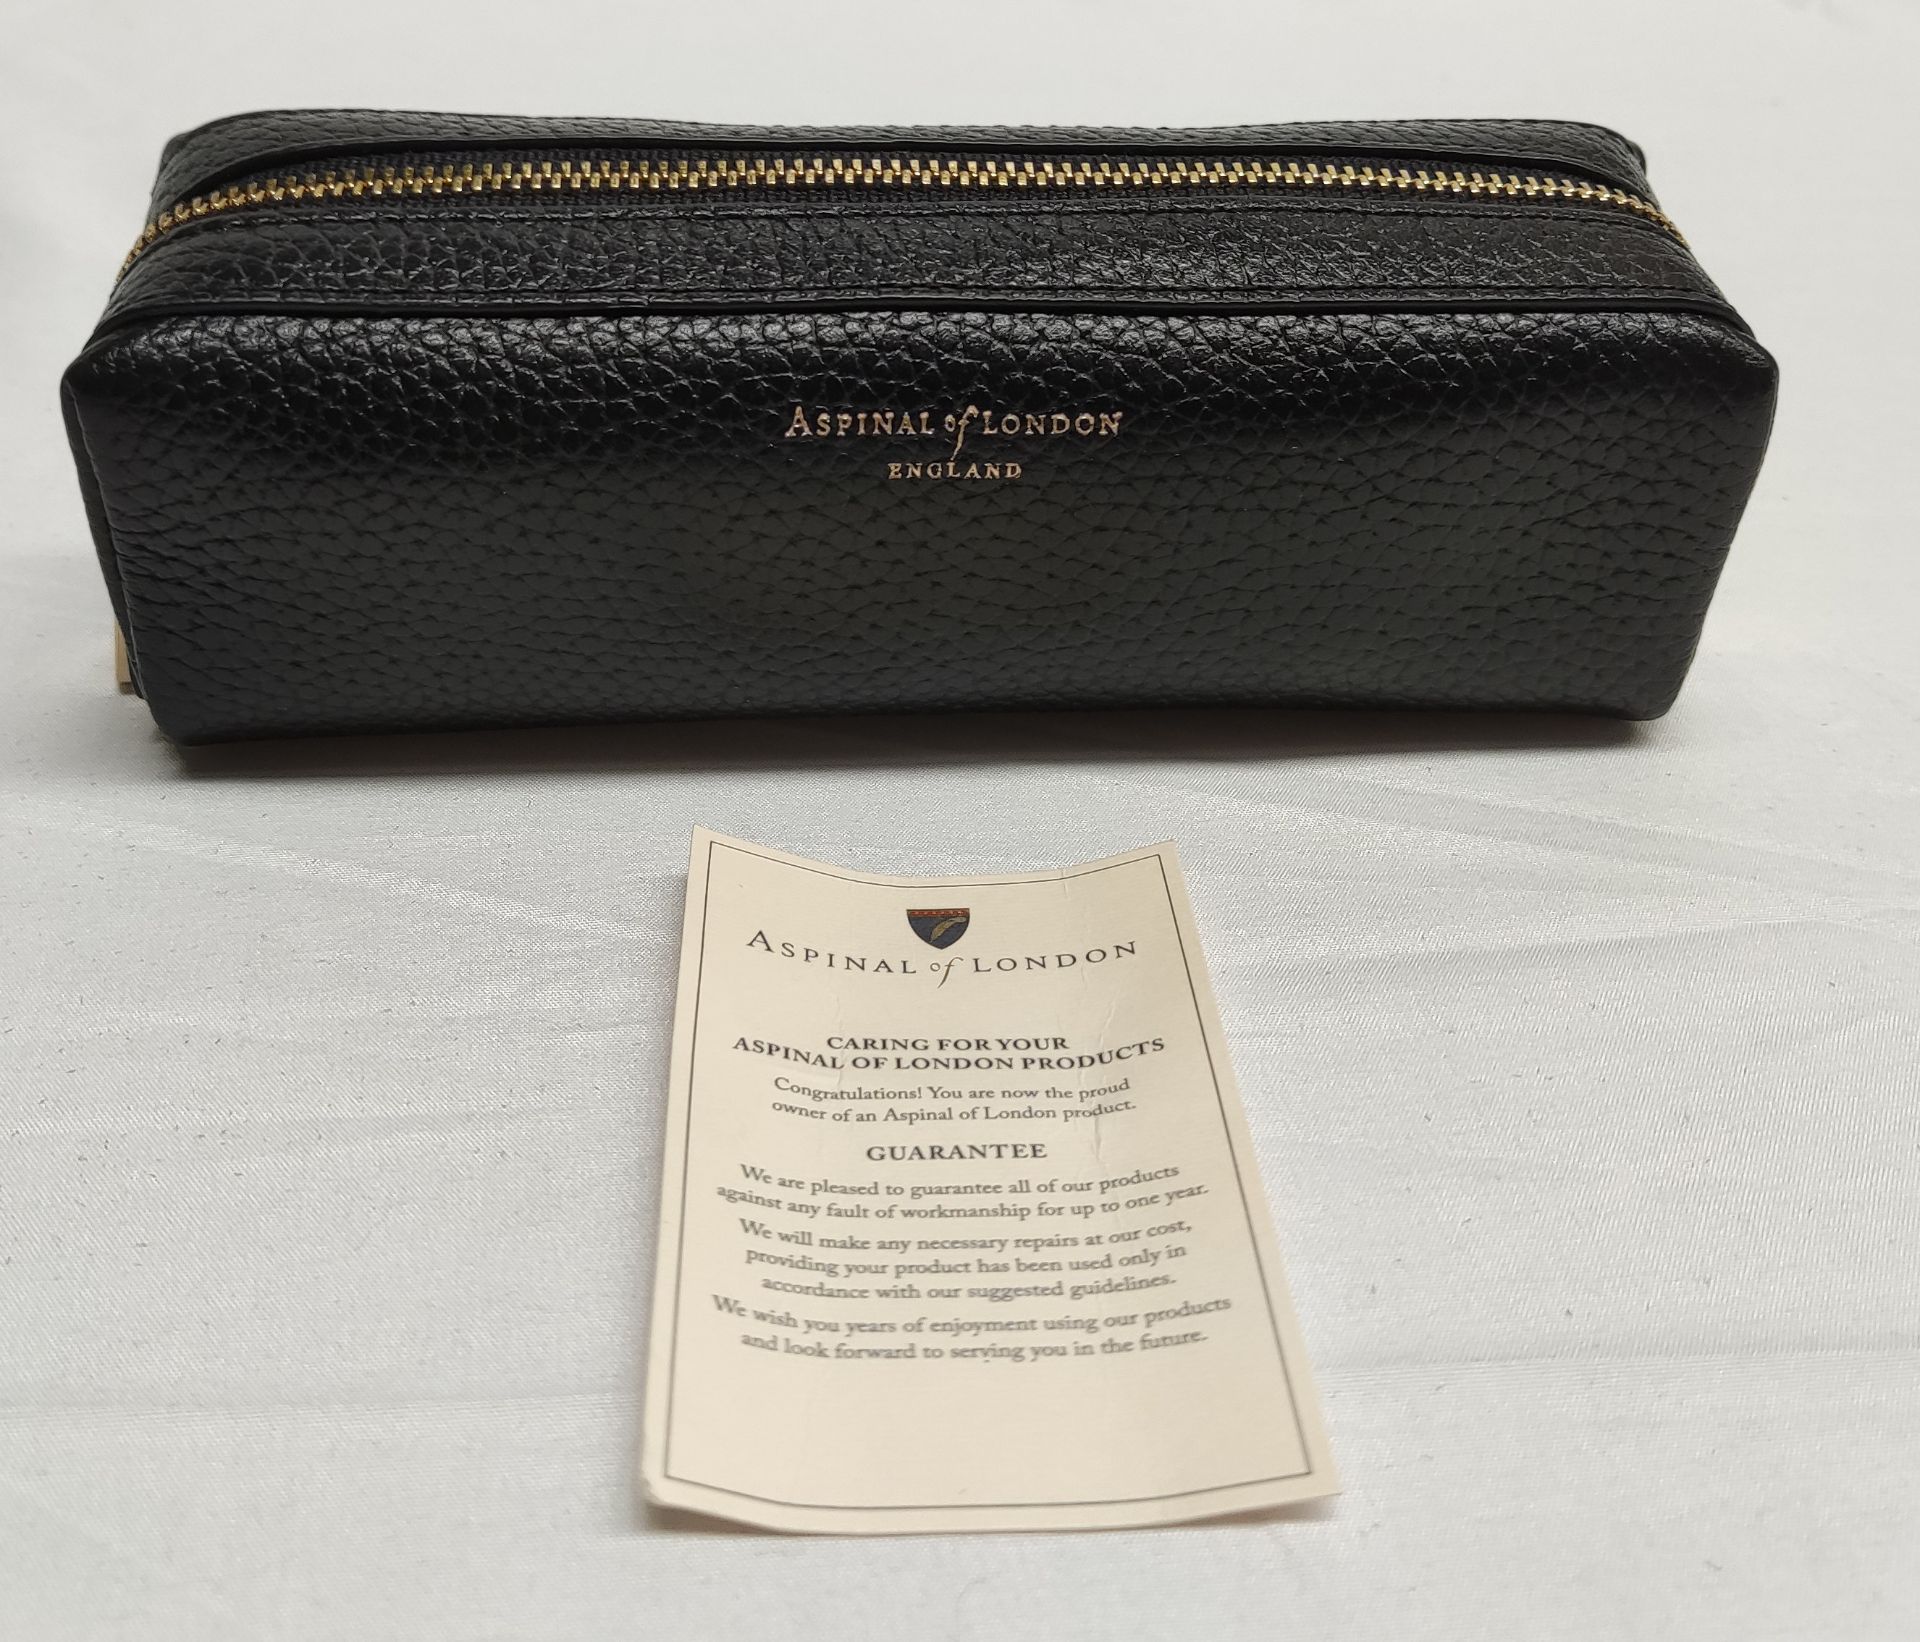 1 x ASPINAL OF LONDON Small London Case In Black Pebble - Boxed - Original RRP £75 - Ref: 6852686/ - Image 8 of 14